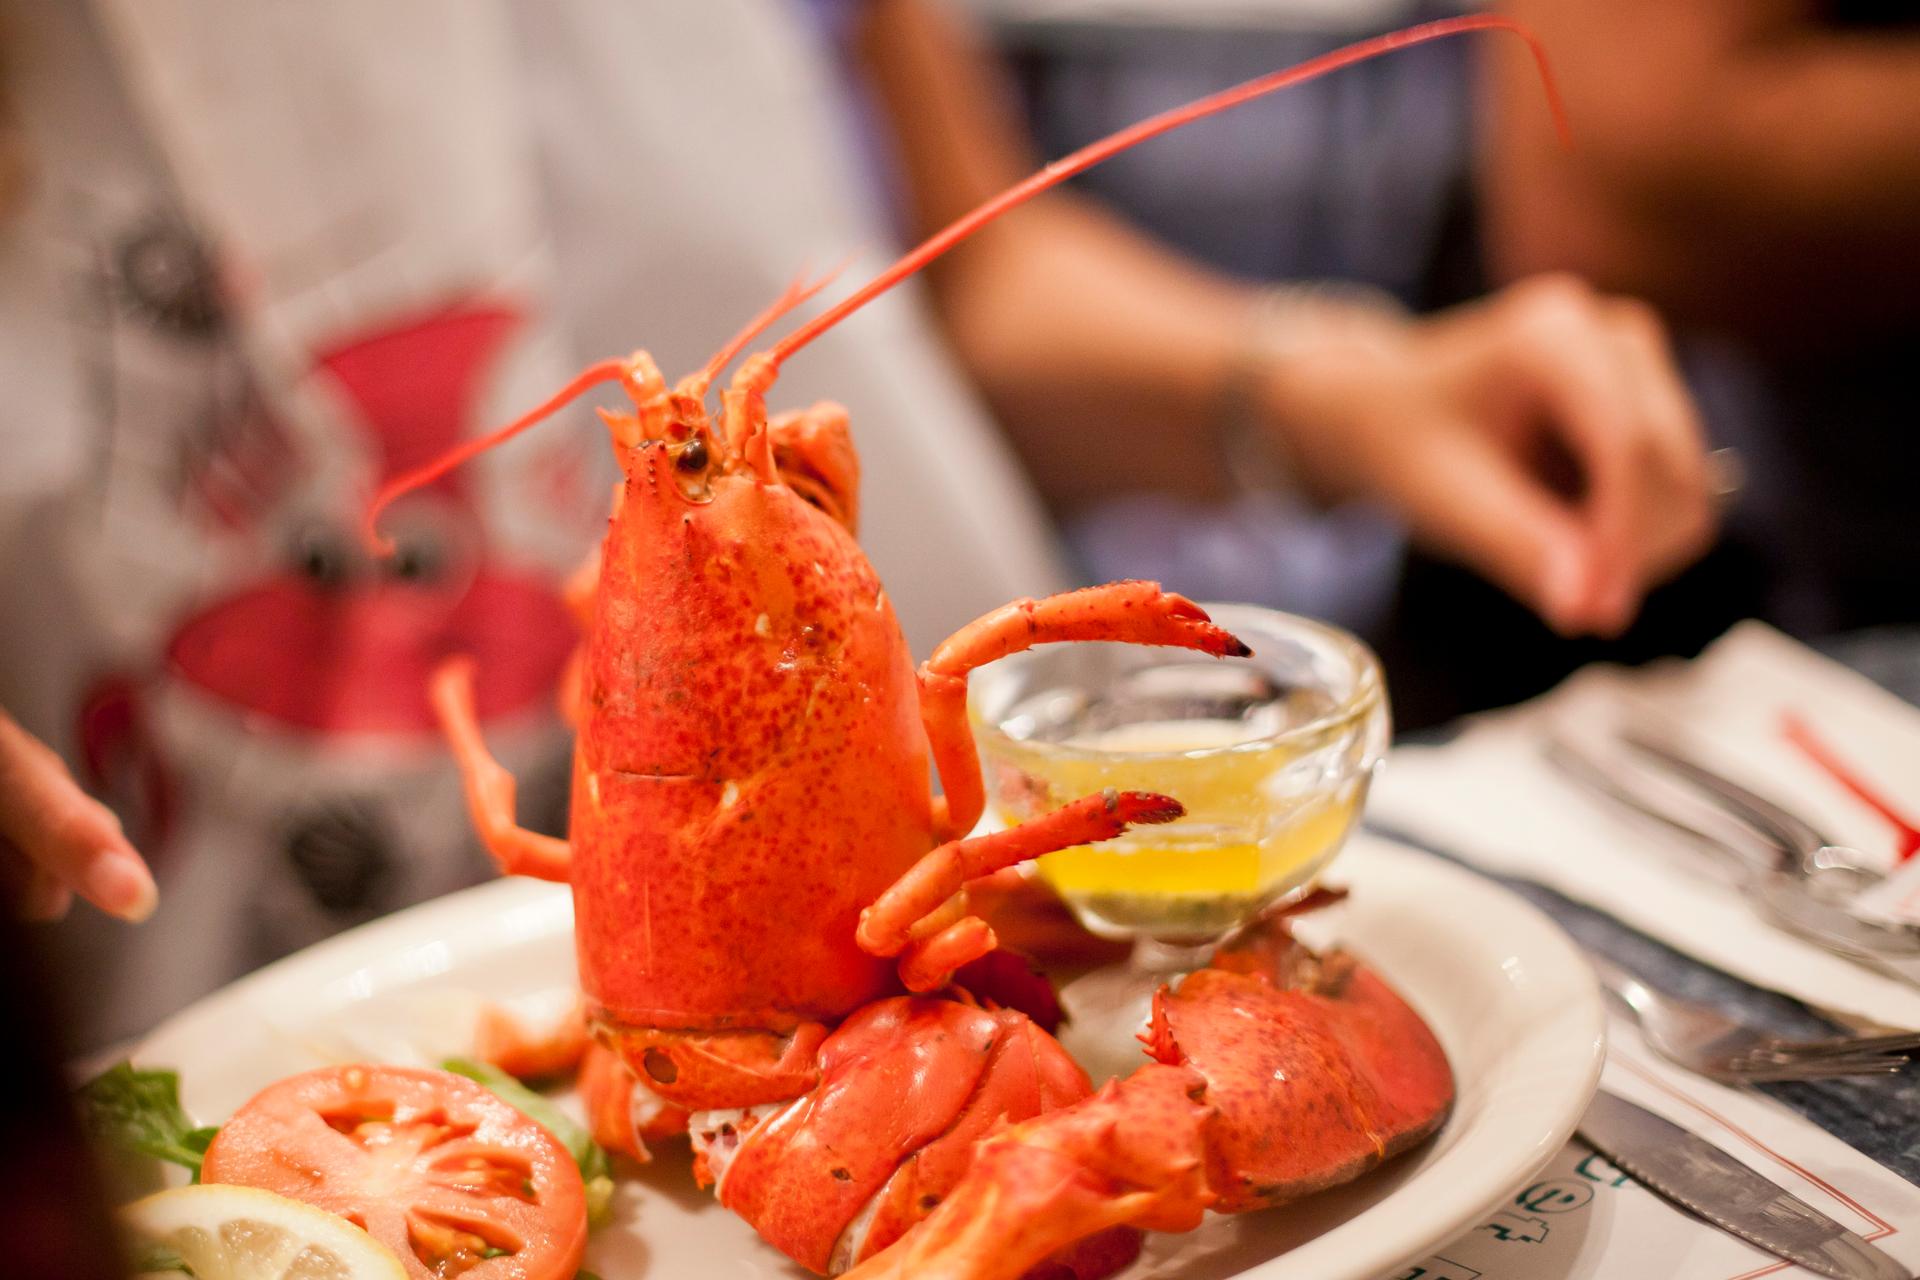 Atlantic lobster and seafood menu to remind you you’re in Newfoundland